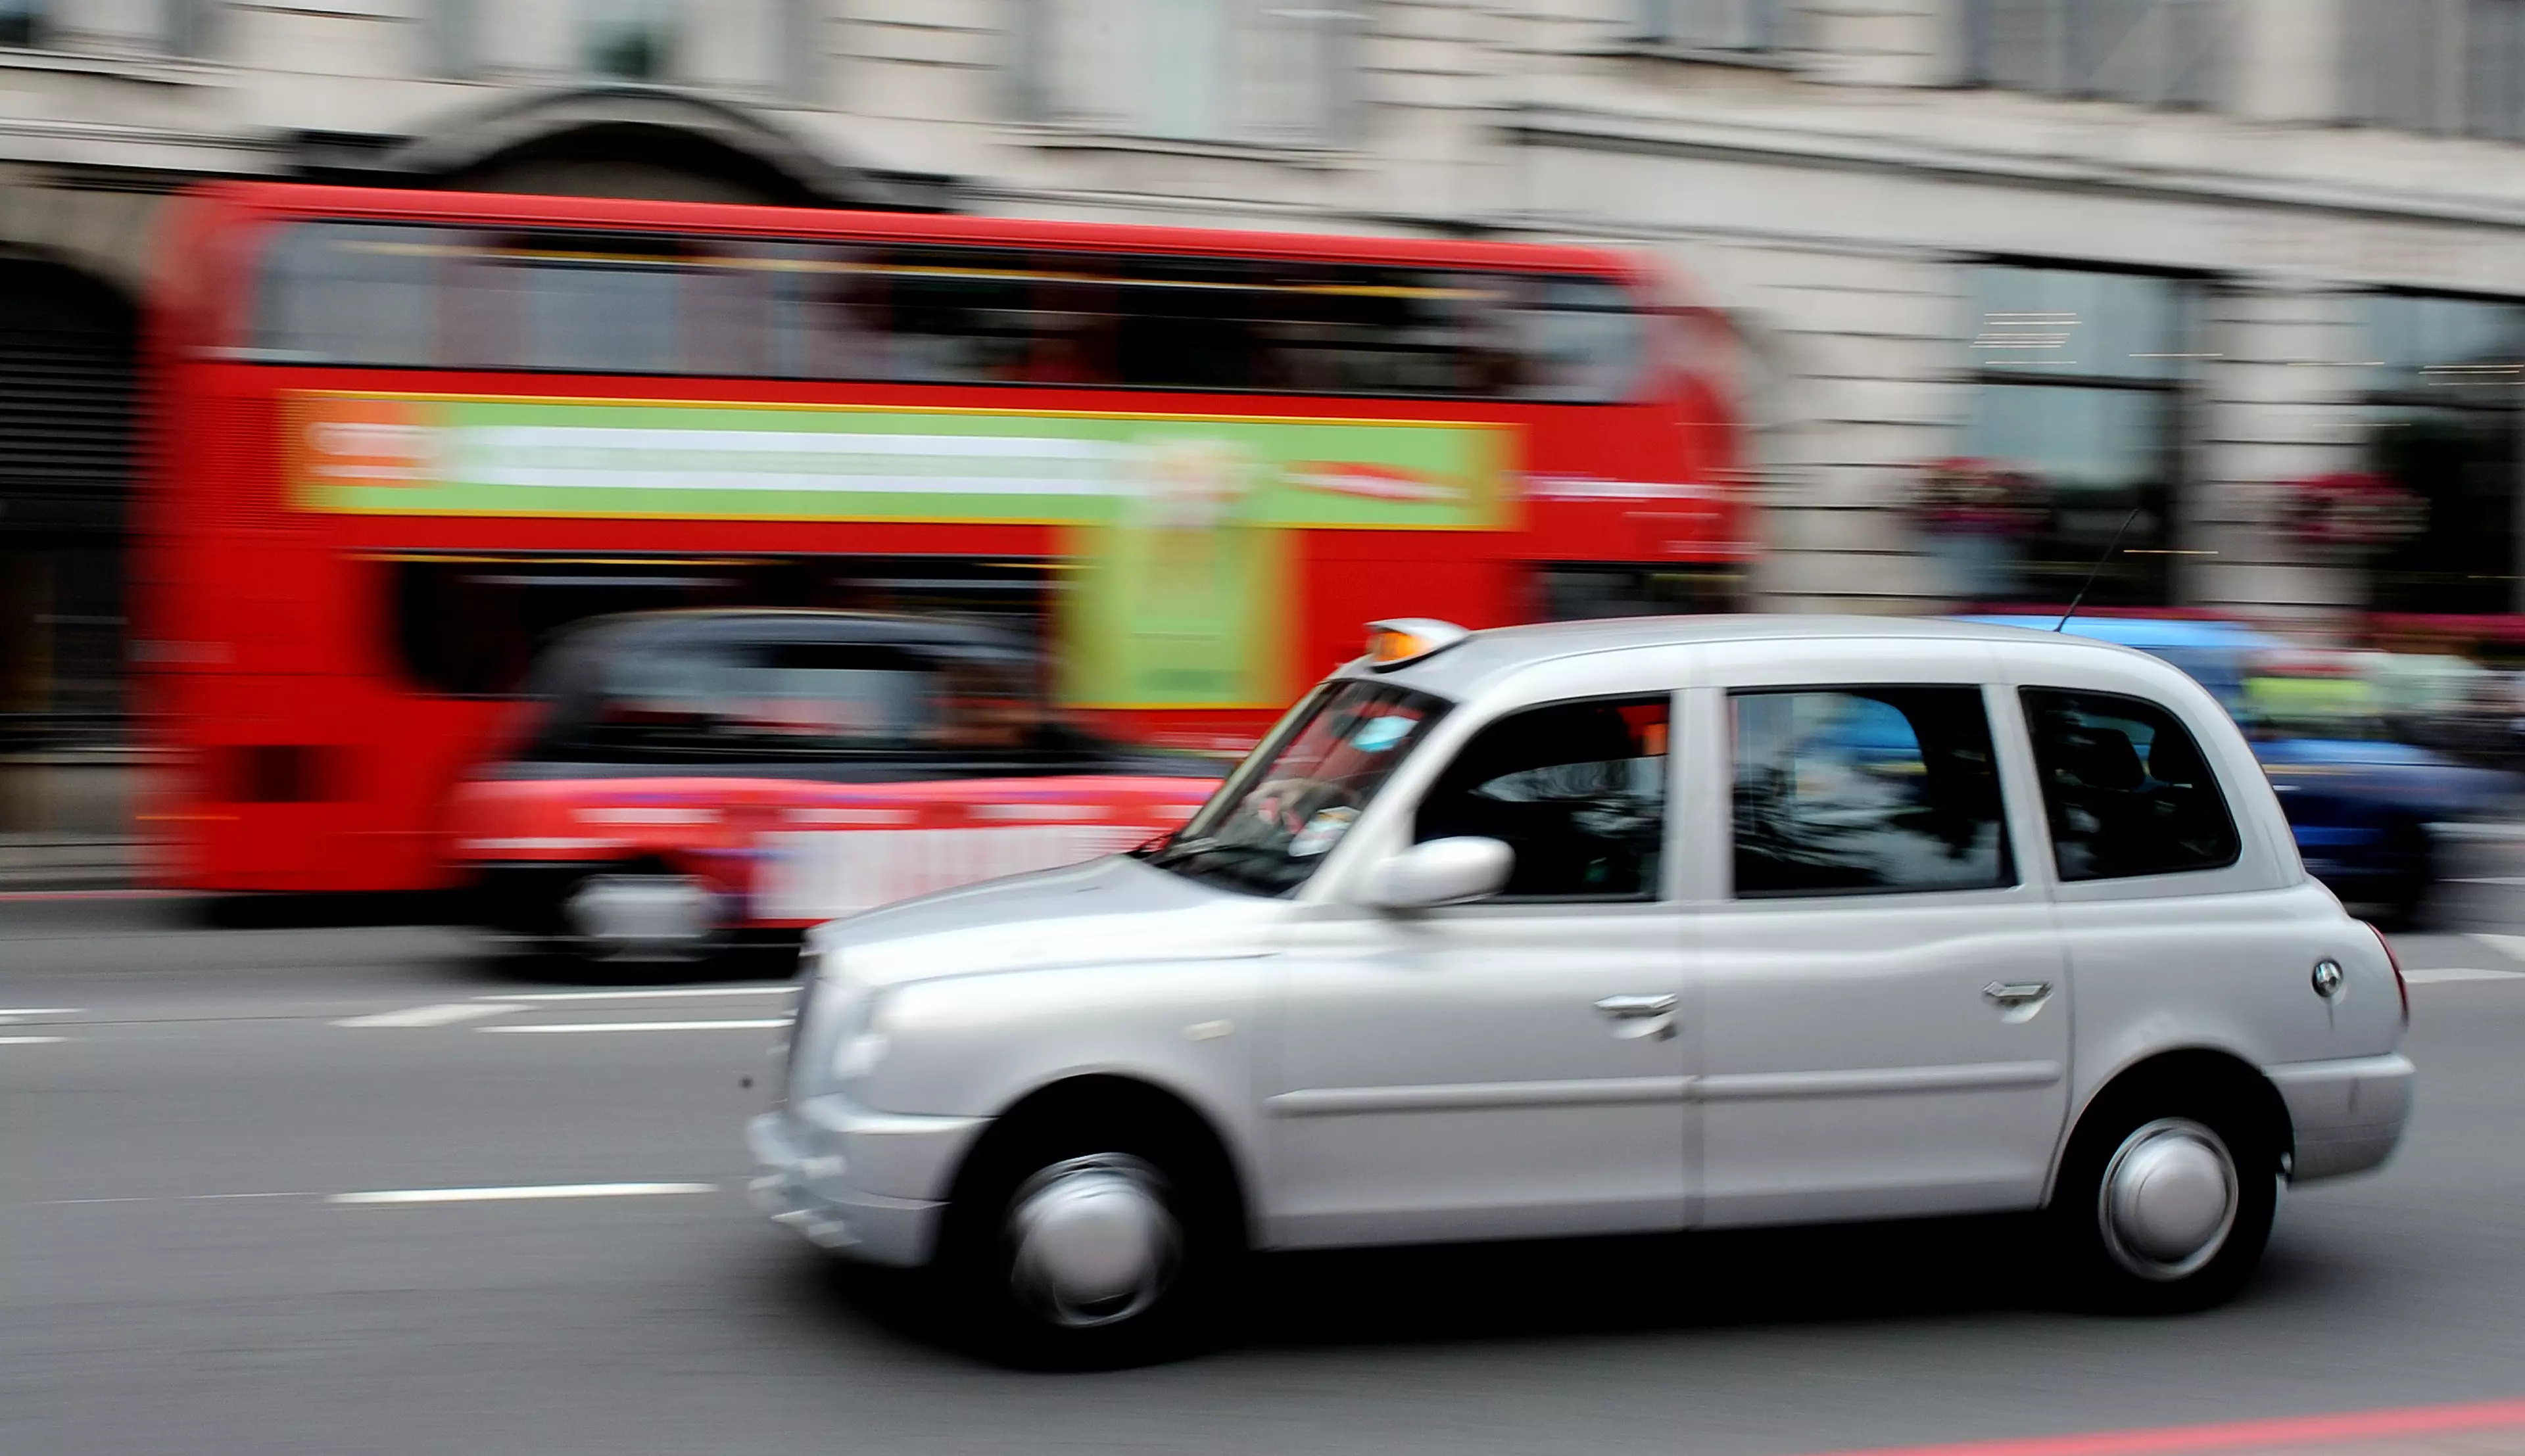 Go Speed Dating in a London Taxi.